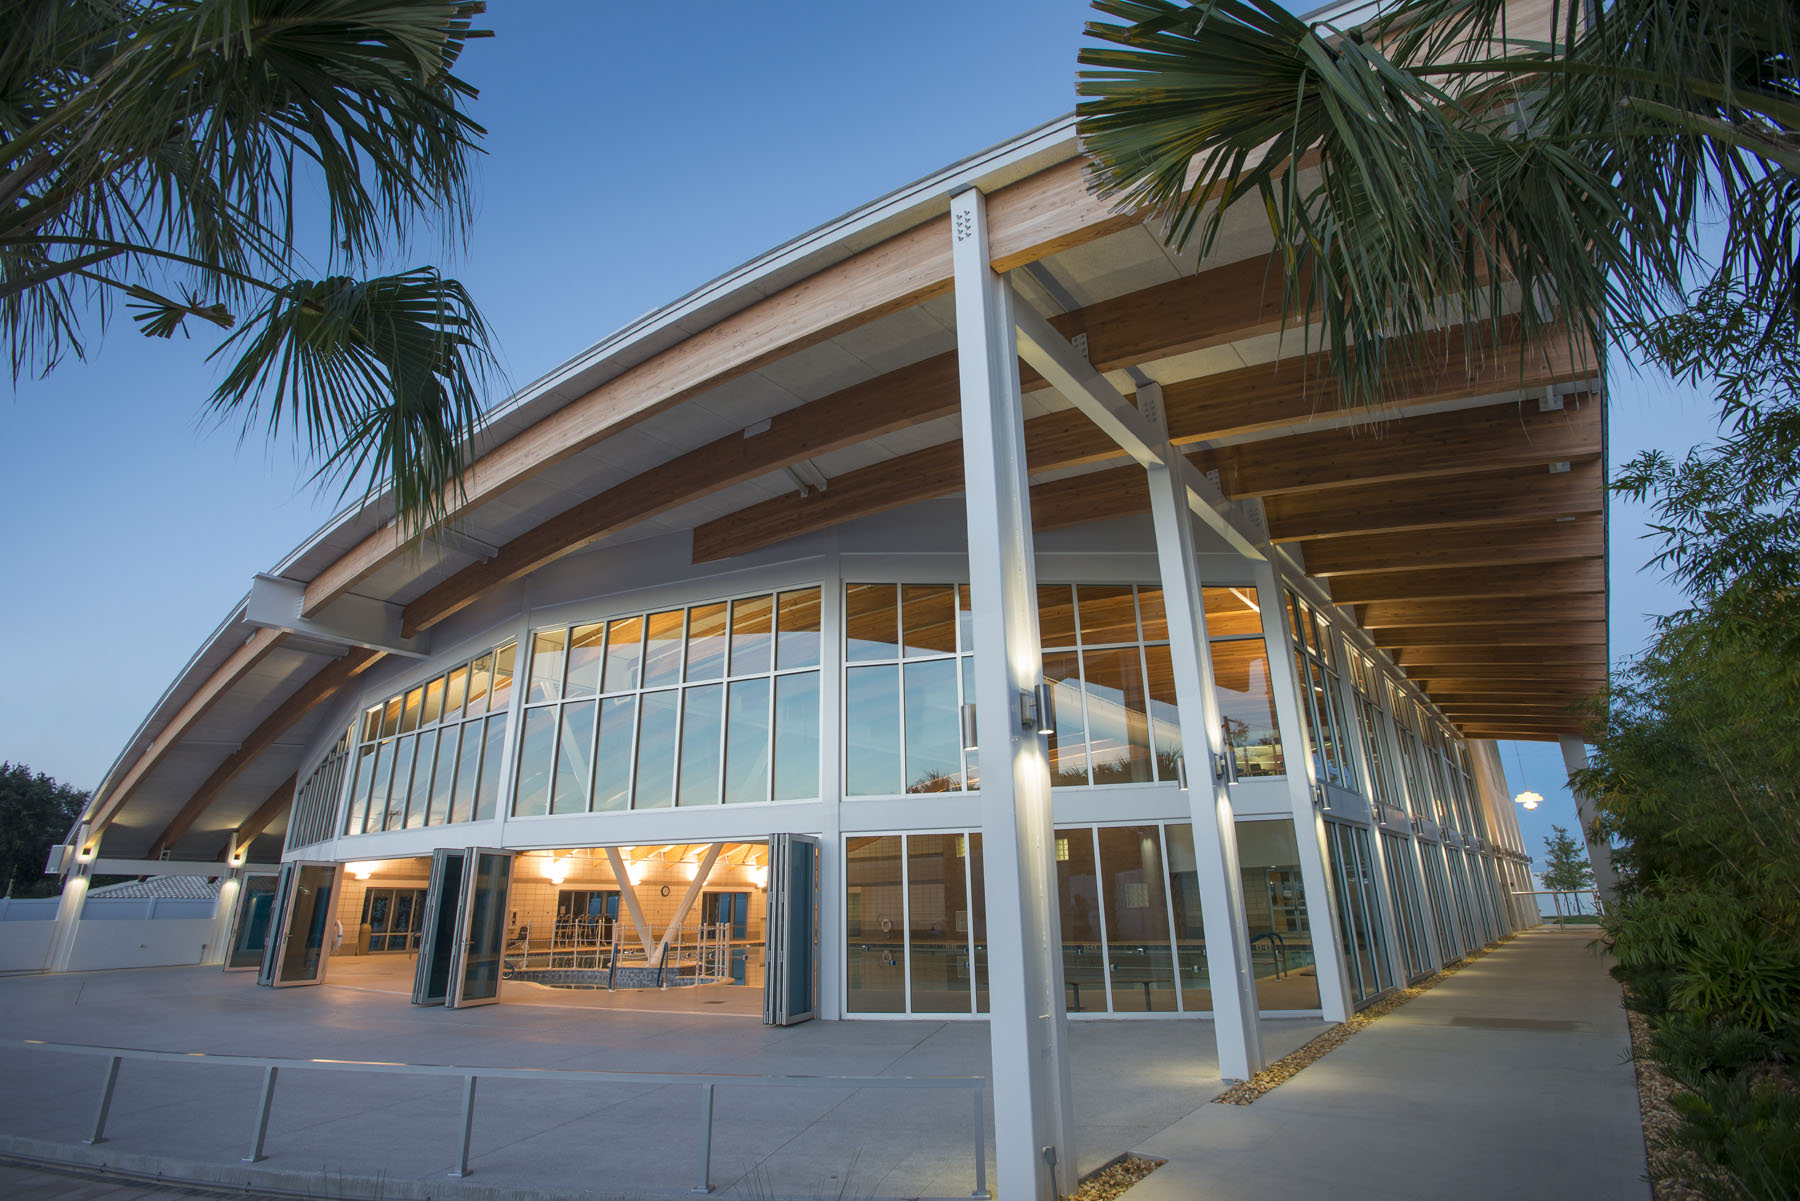 The Sun N Fun Center is LEED Gold certified - come check it out!